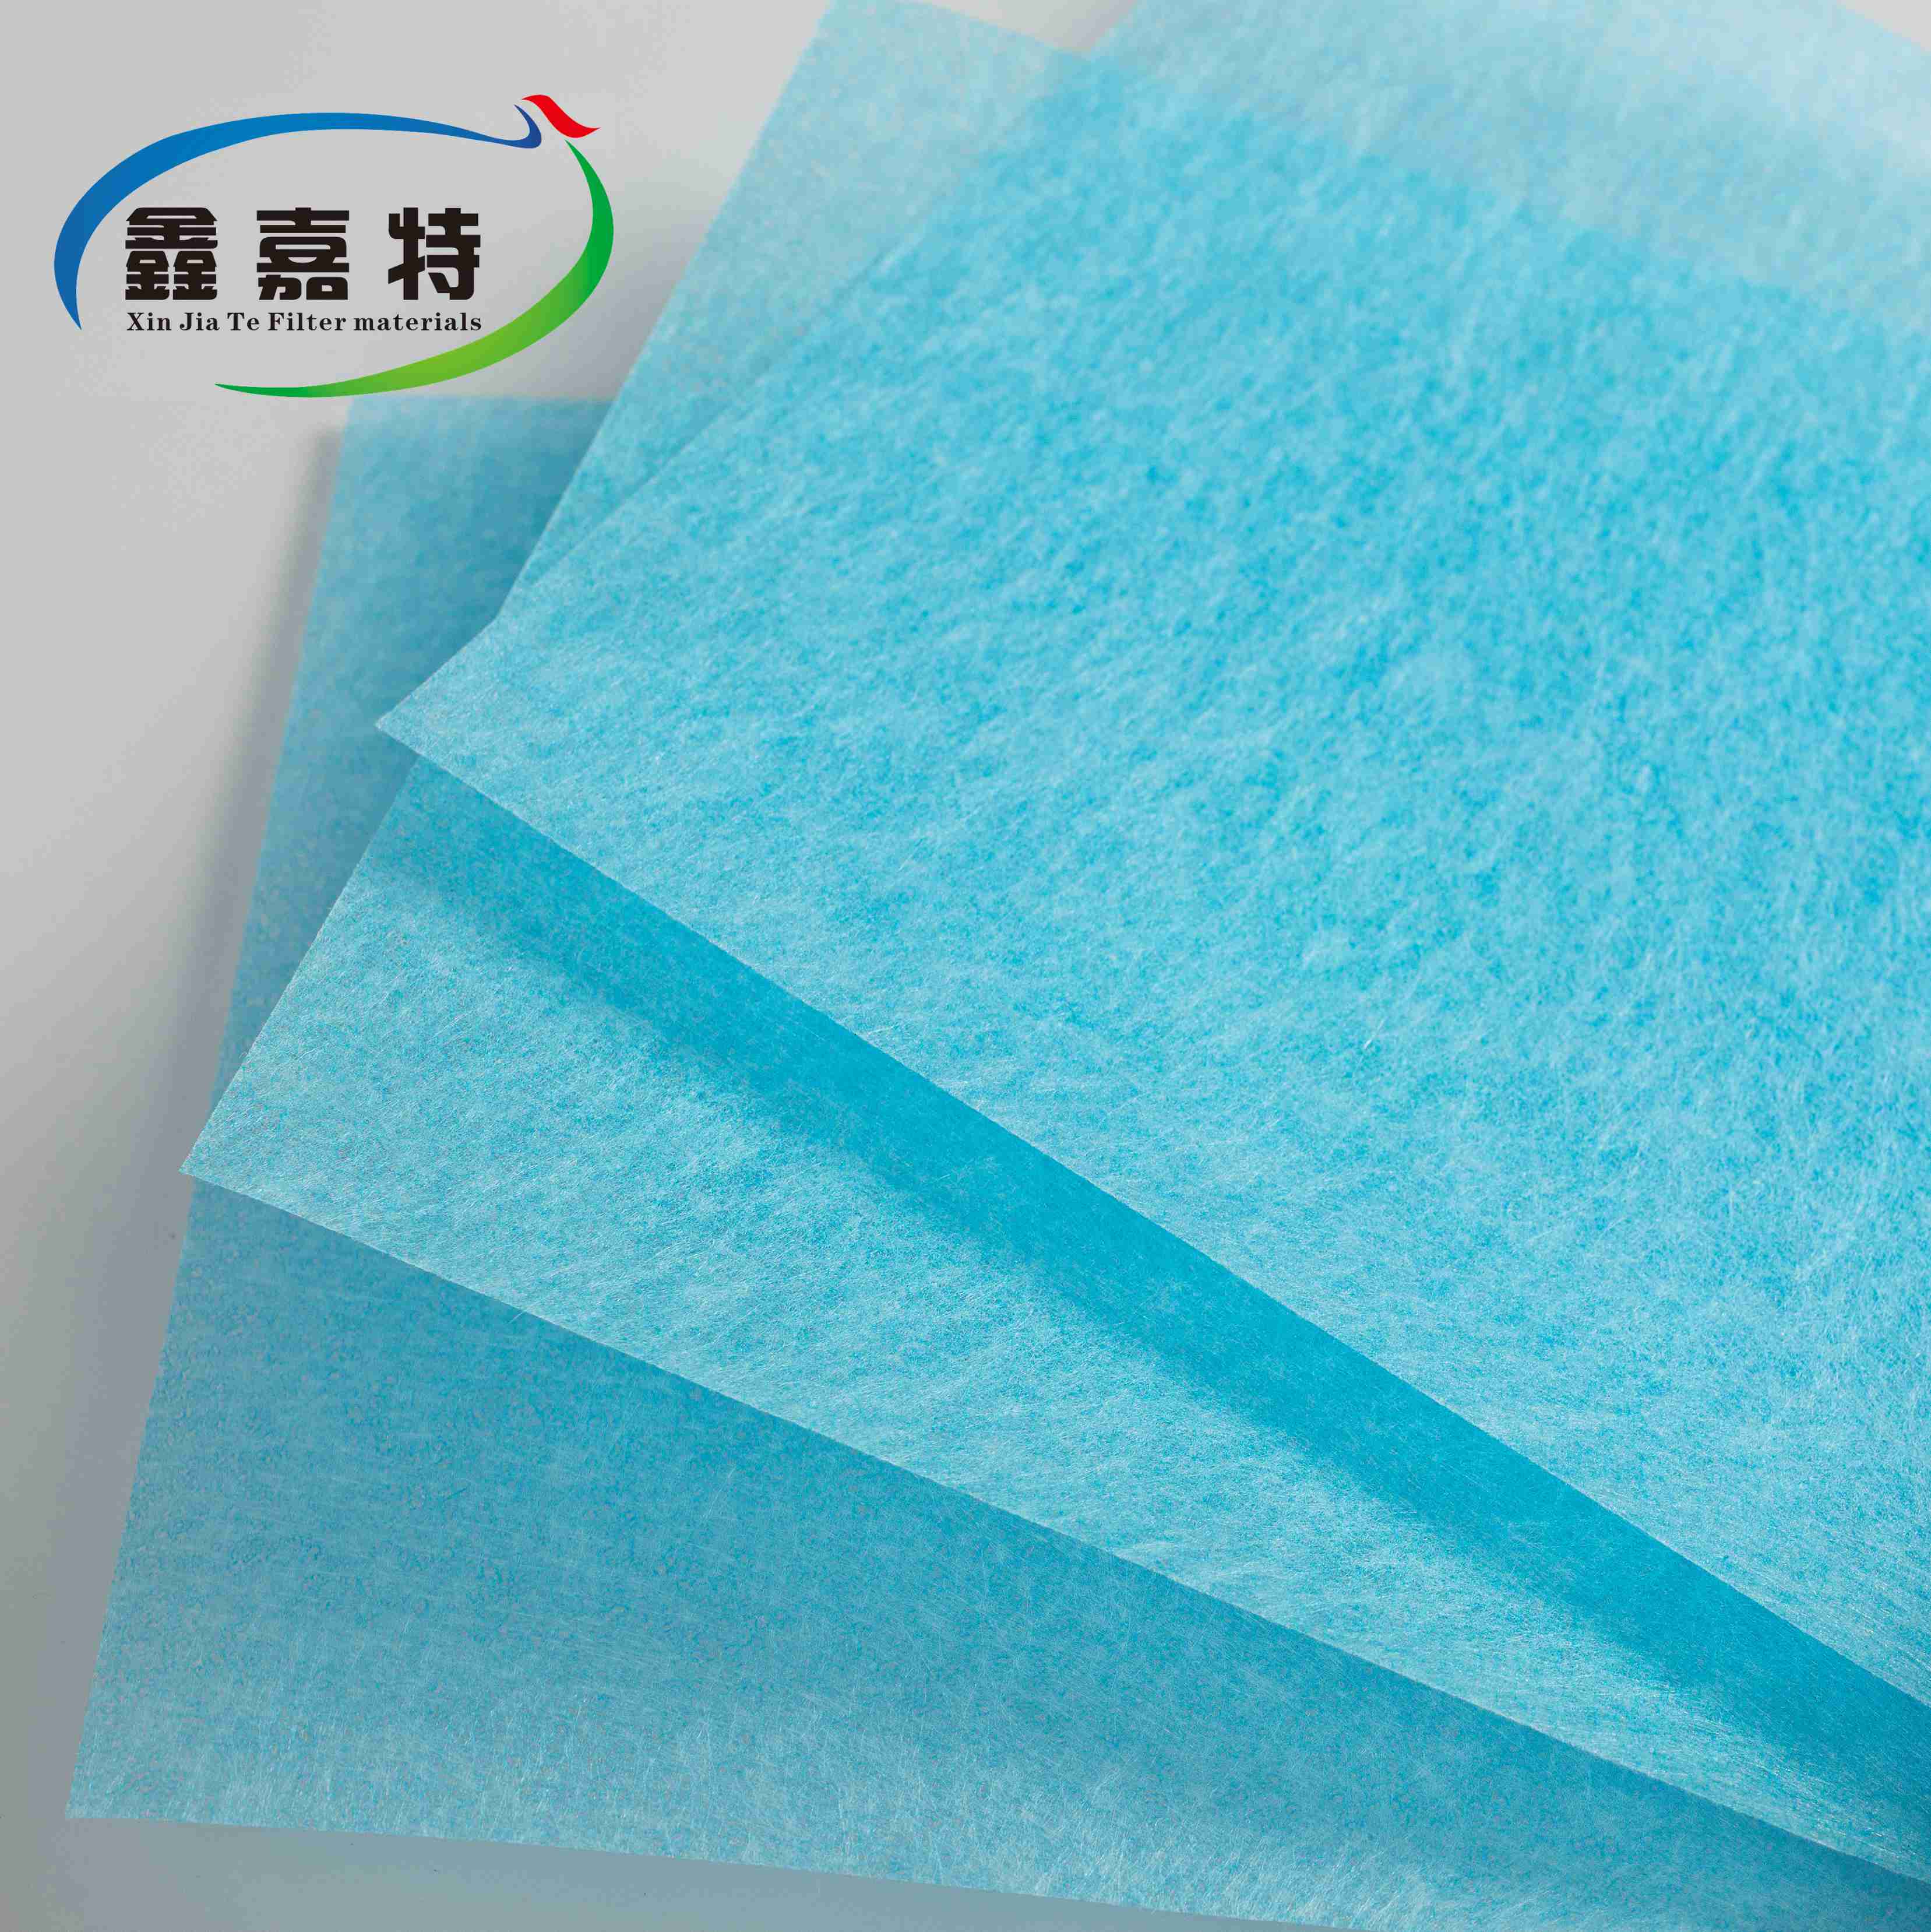 Water-proof High Hydrophobicity Nonwoven for Air Filter Media Meltblown Support Layer